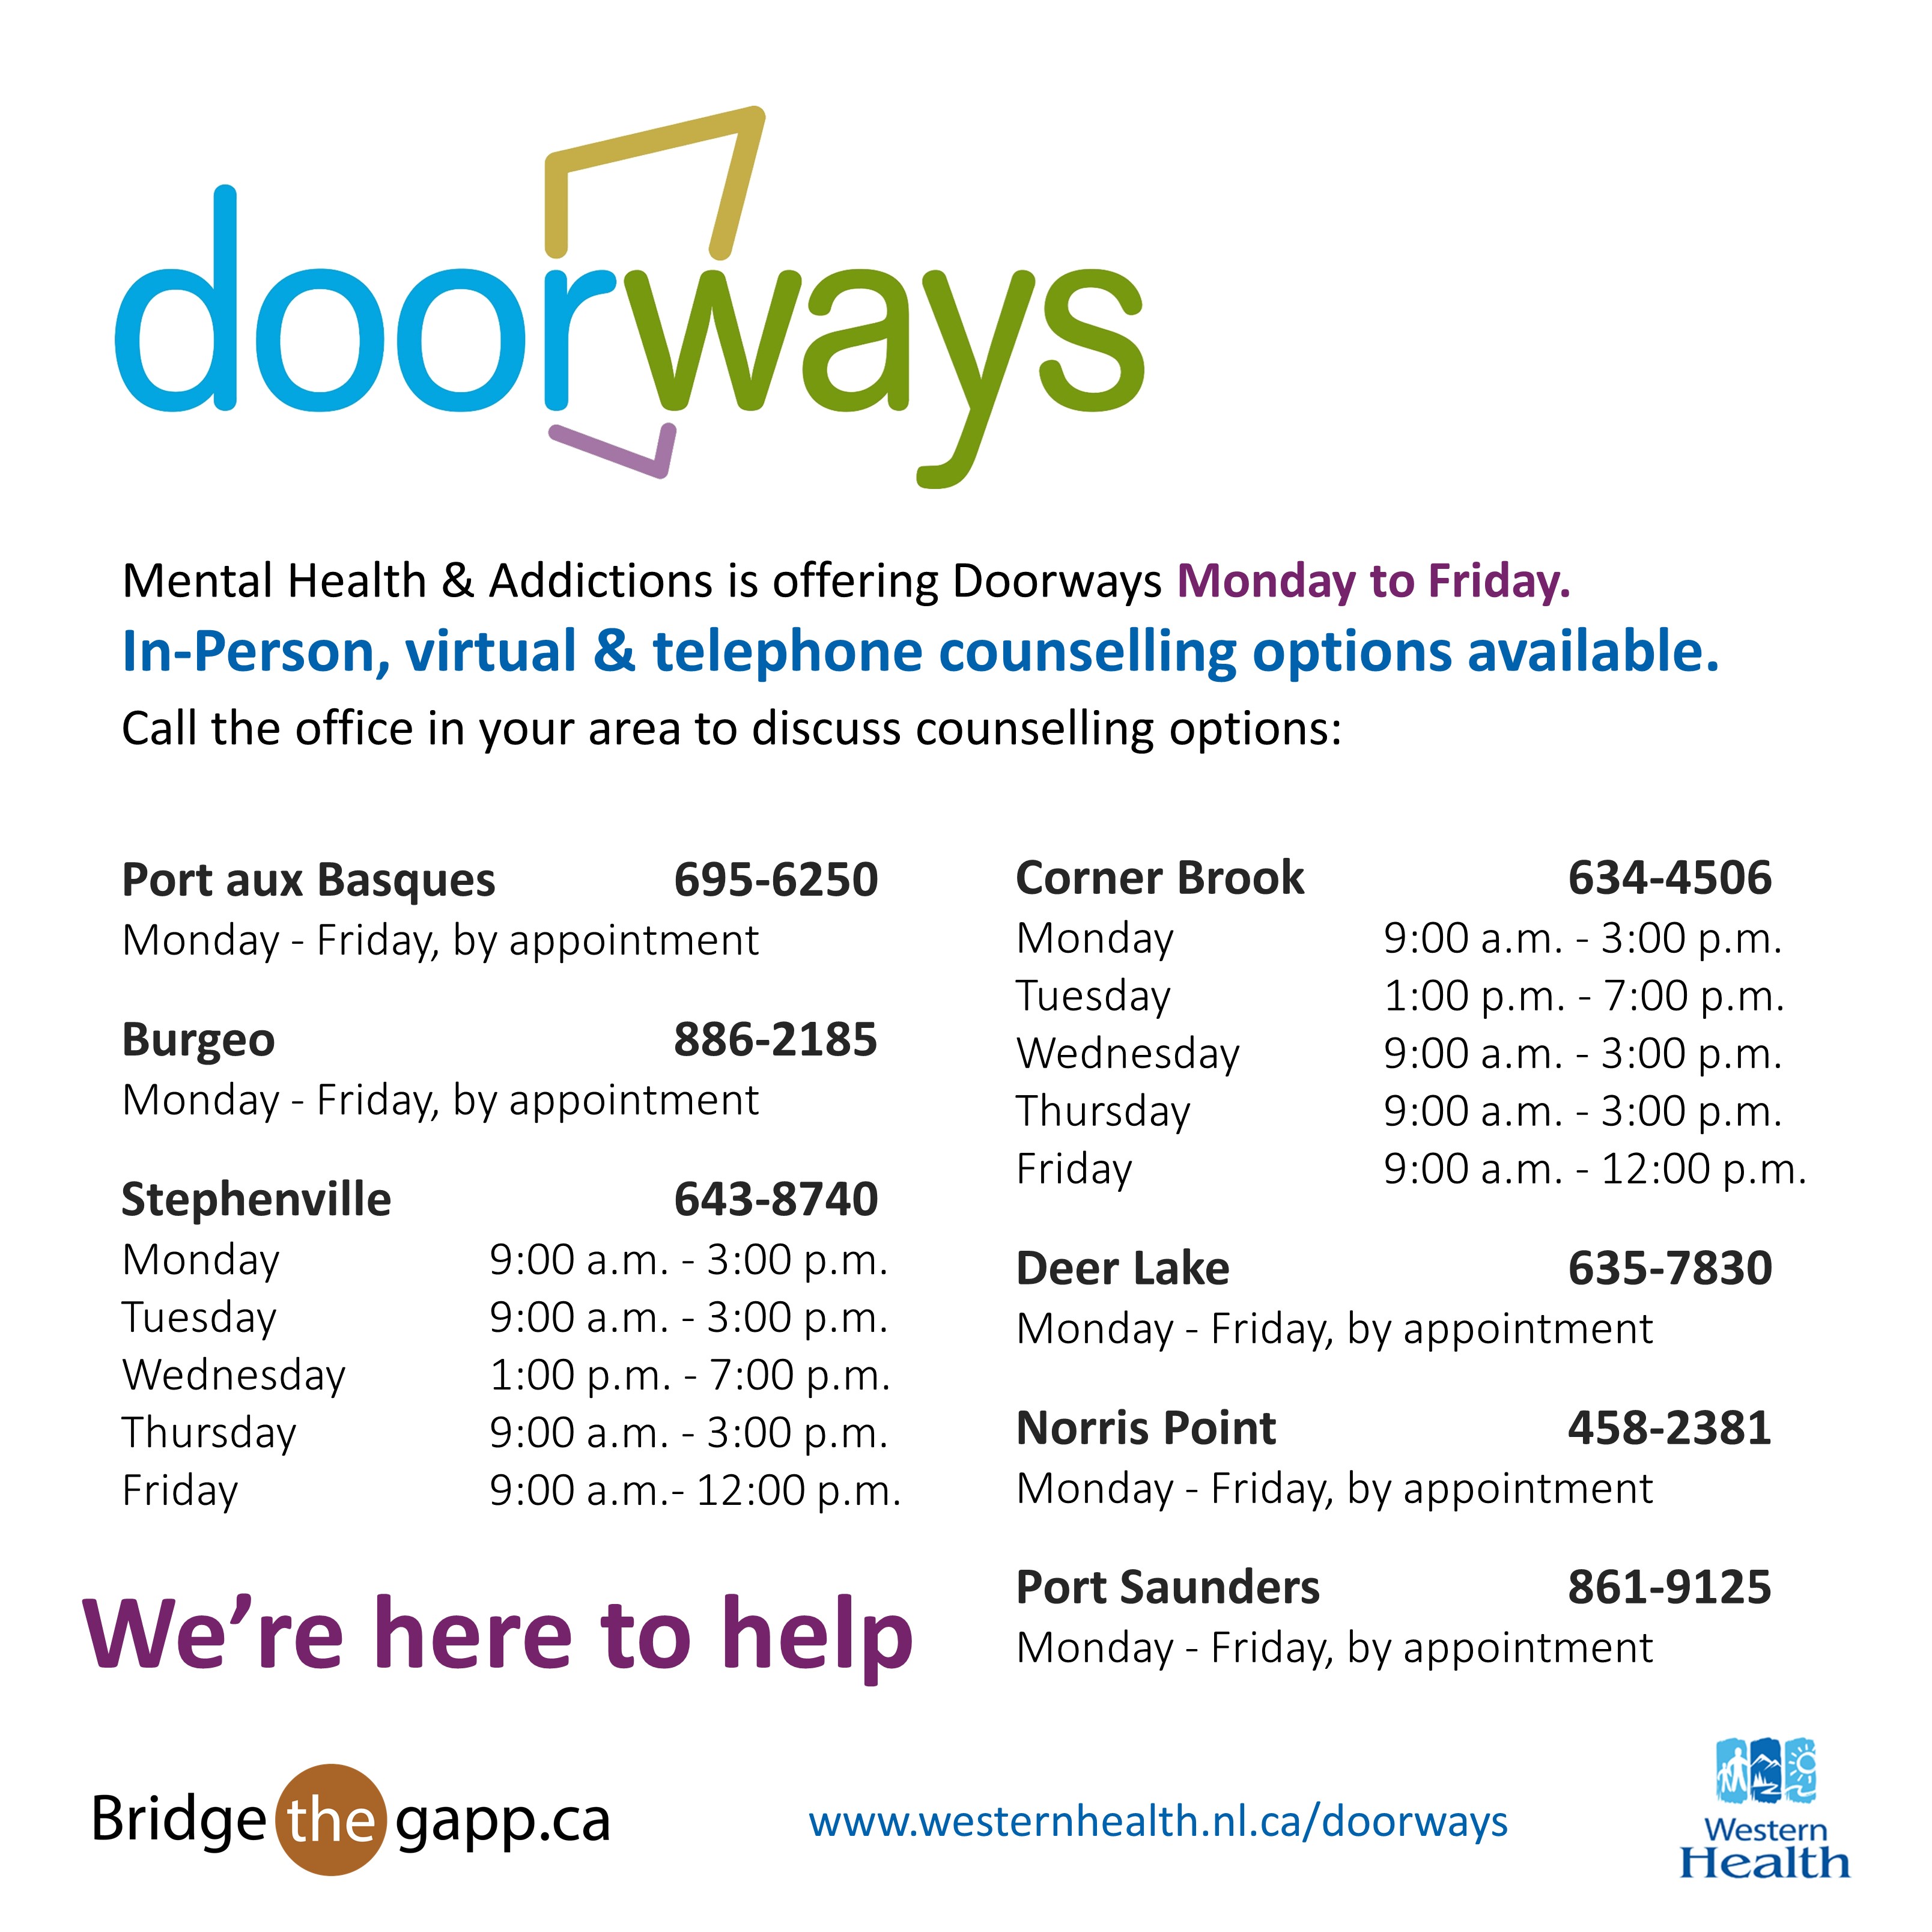 Doorways - In Person, Virtual & Telephone Options Available